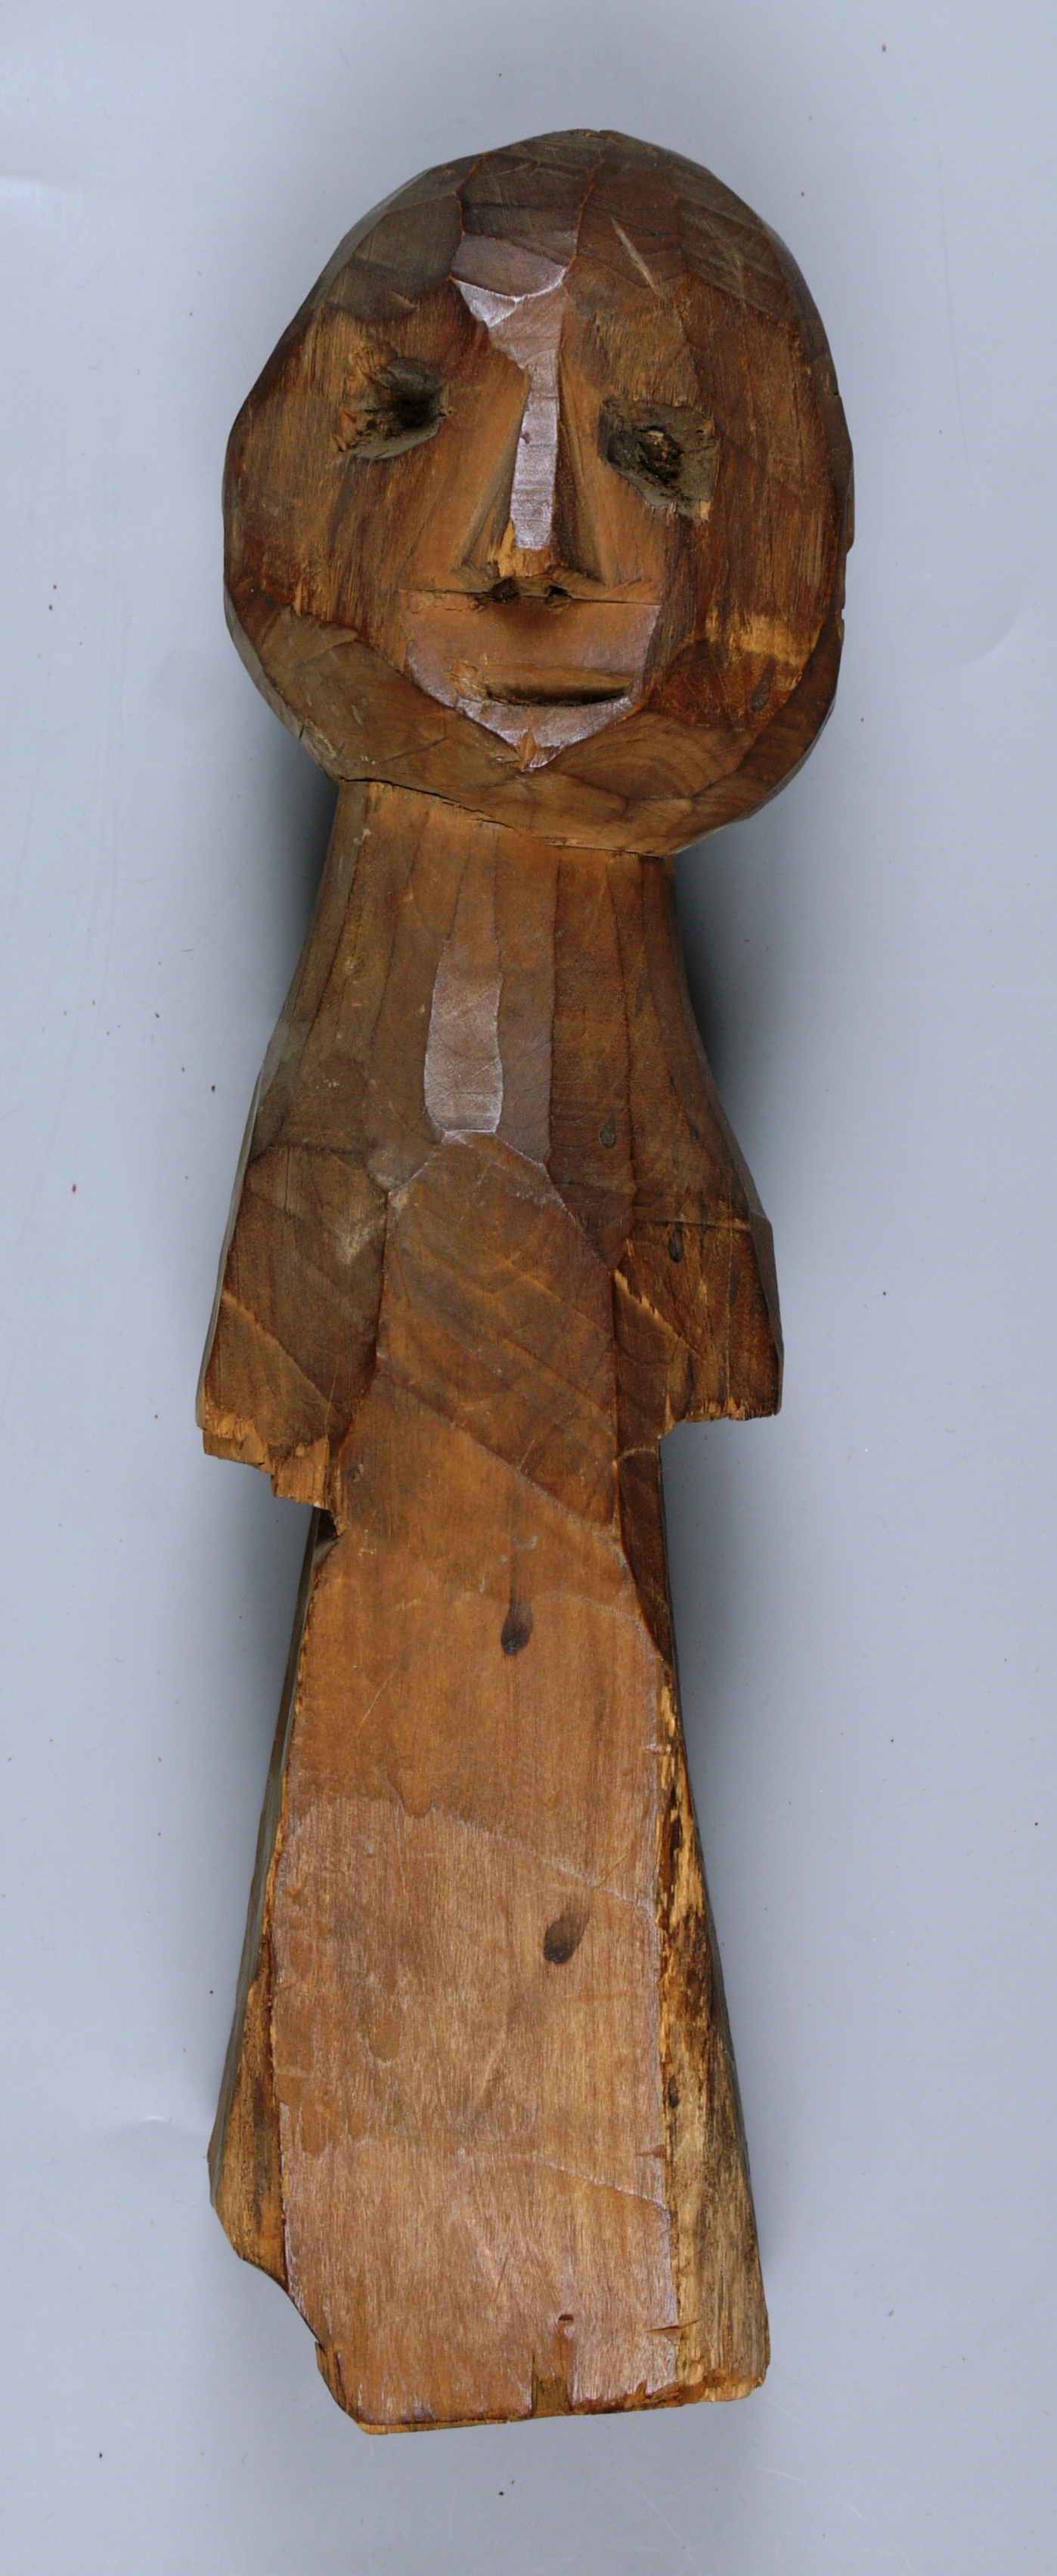 carved, human figure made of wood: shaped with a head and face and a torso. the surface of the wood is shiny